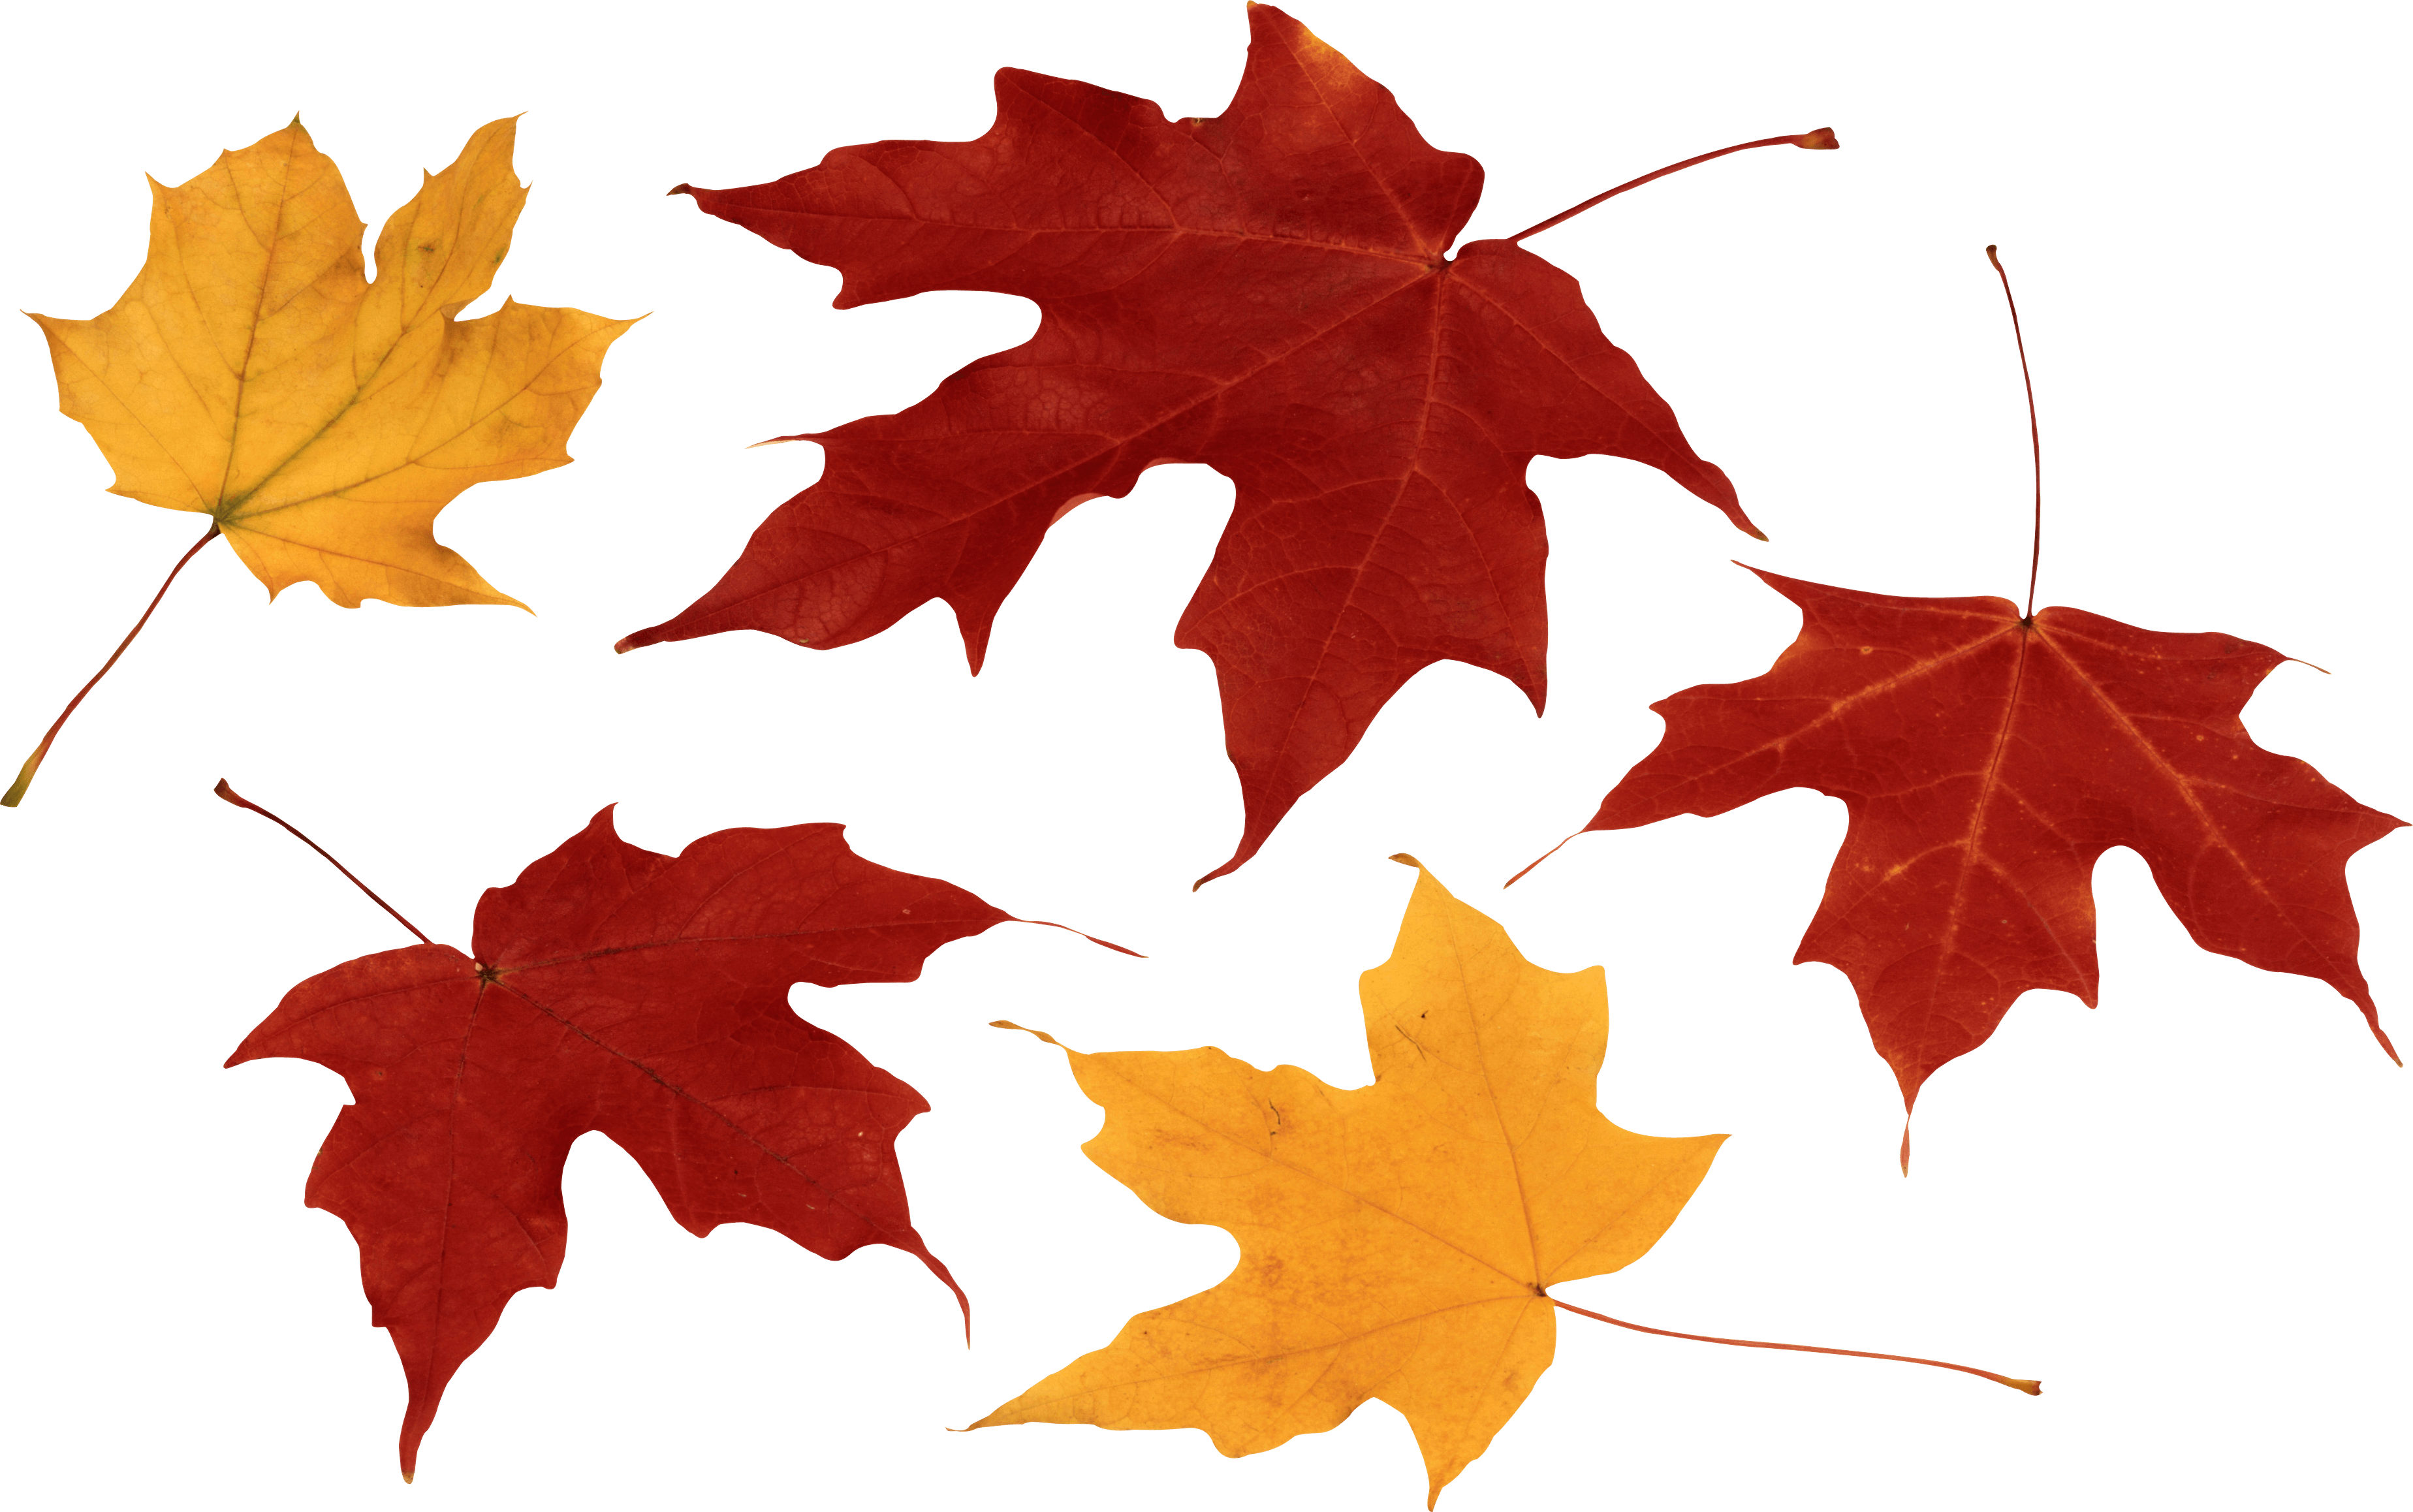 Autumn png by VanessaRebelAng